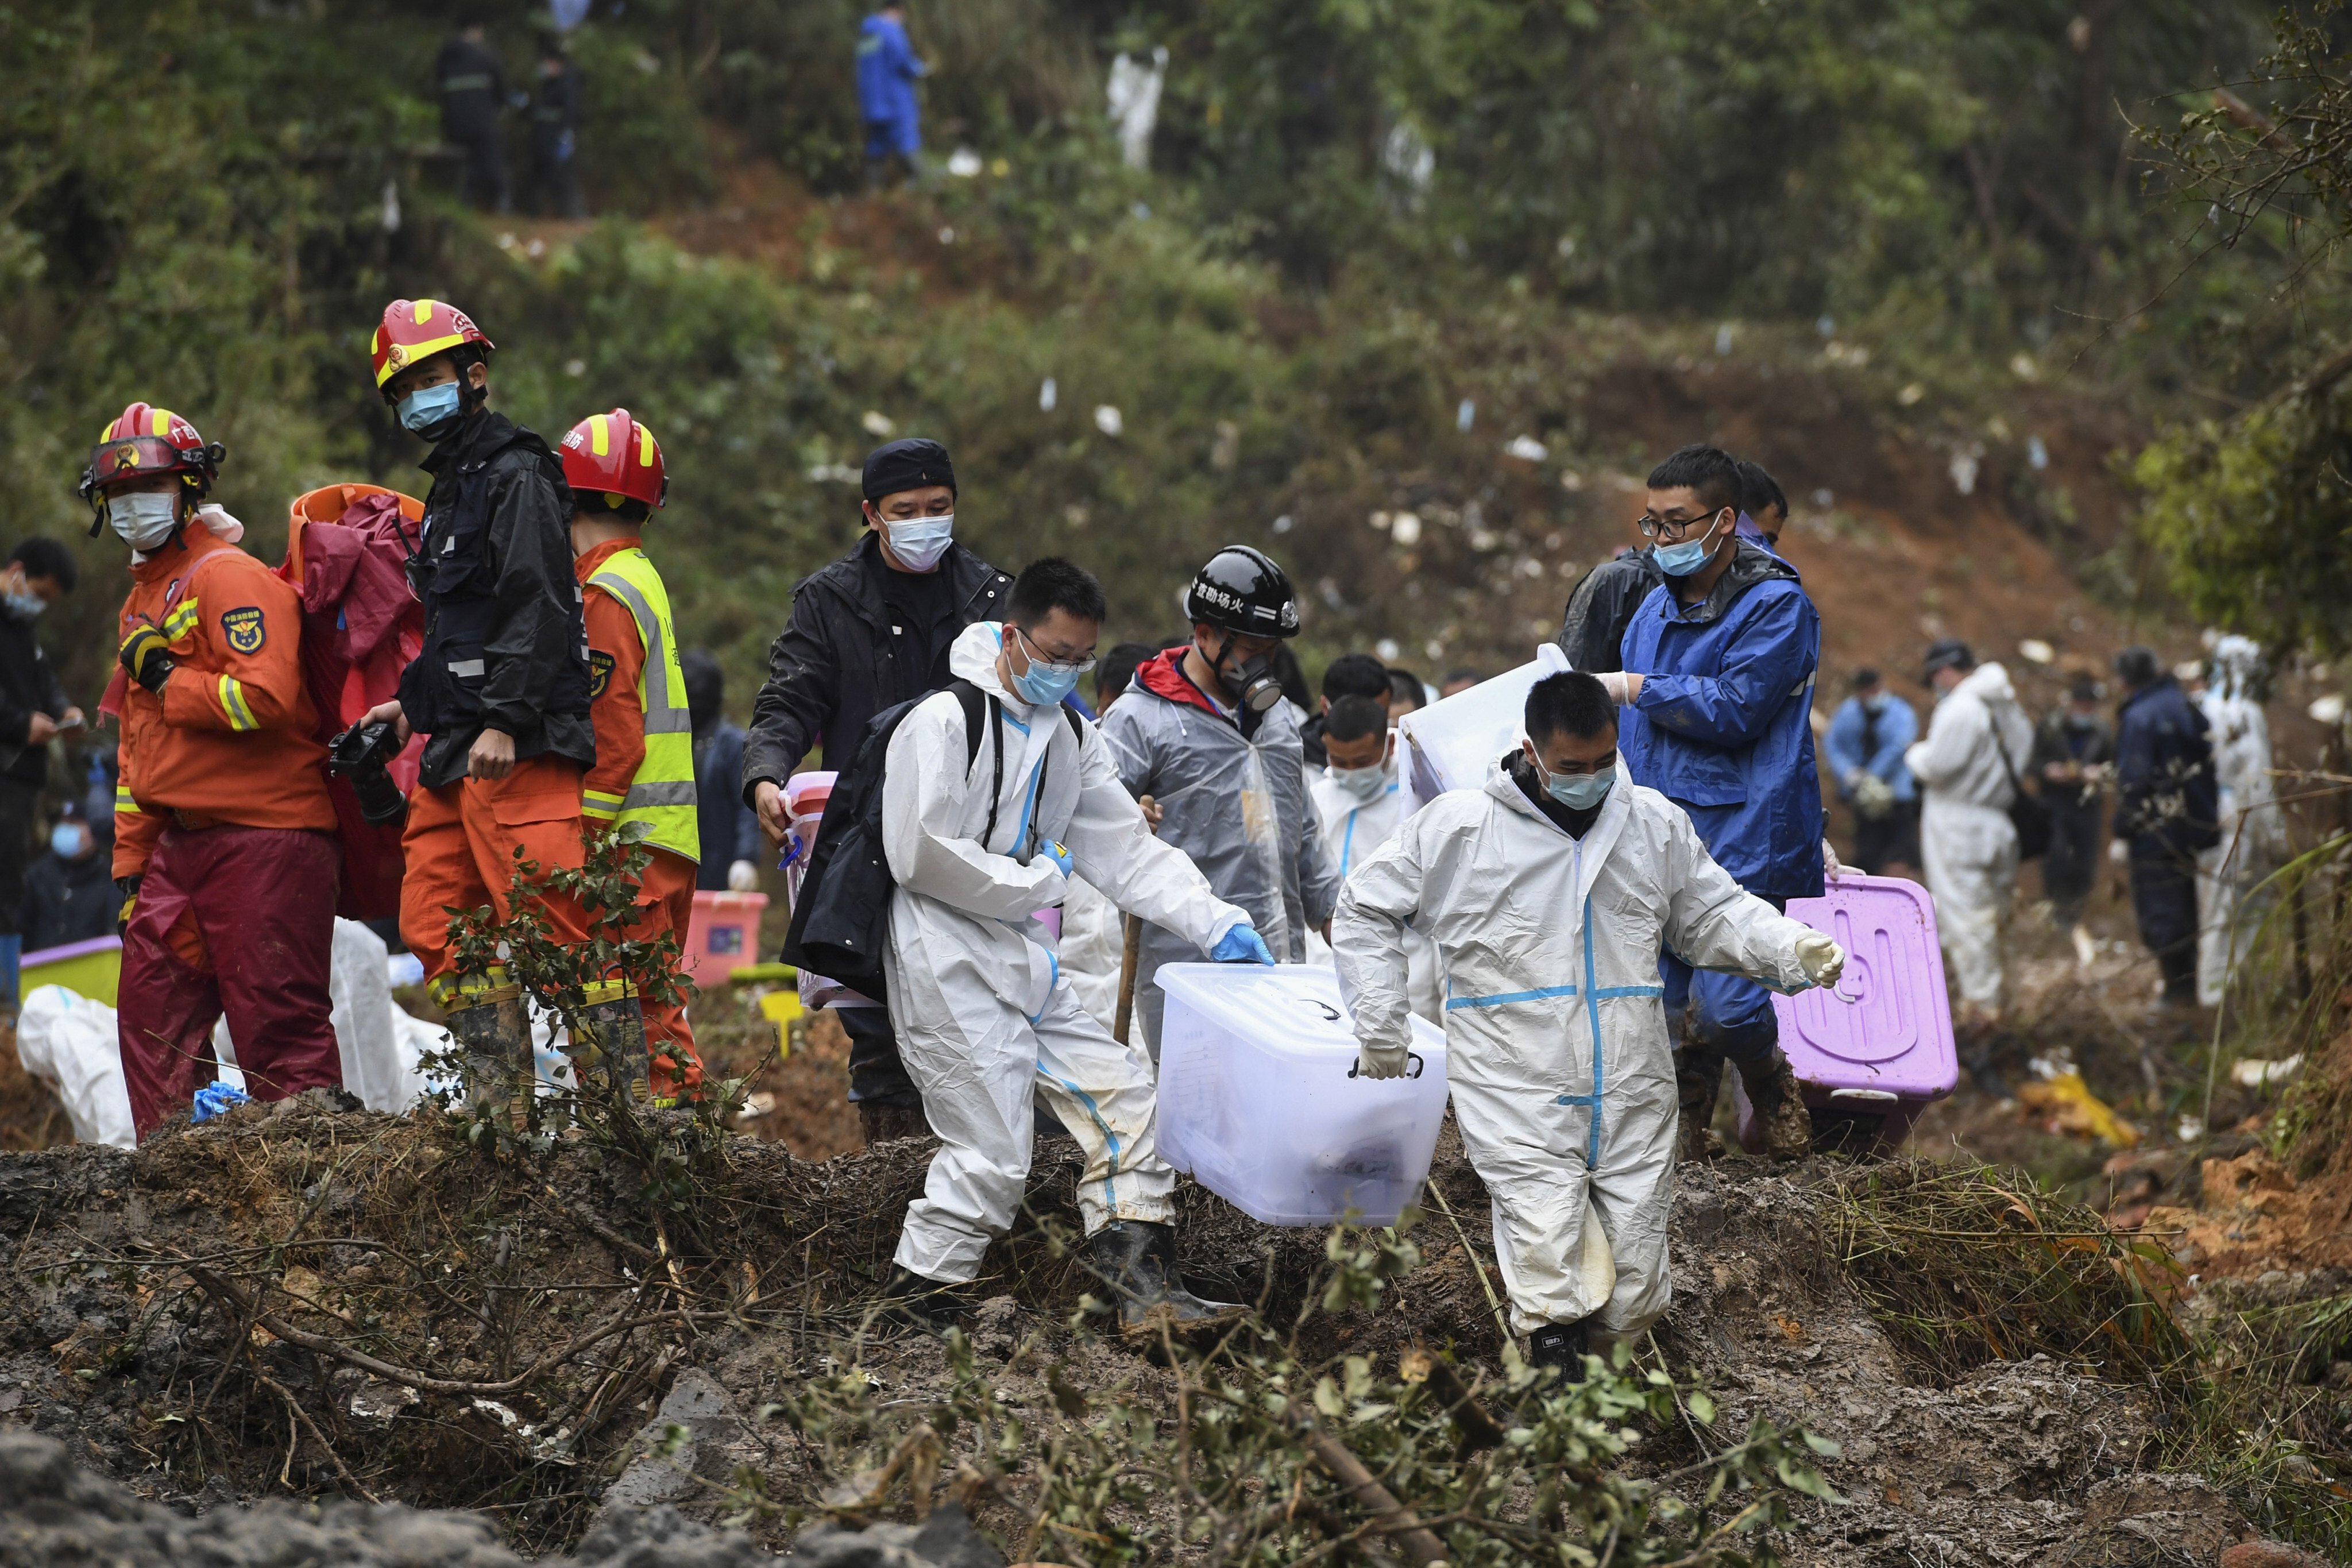 Search and rescue workers carry boxes believed to contain belongings of people on board the crashed China Eastern flight in Teng county in the Guangxi Zhuang autonomous region on Thursday. Photo: Xinhua via AP